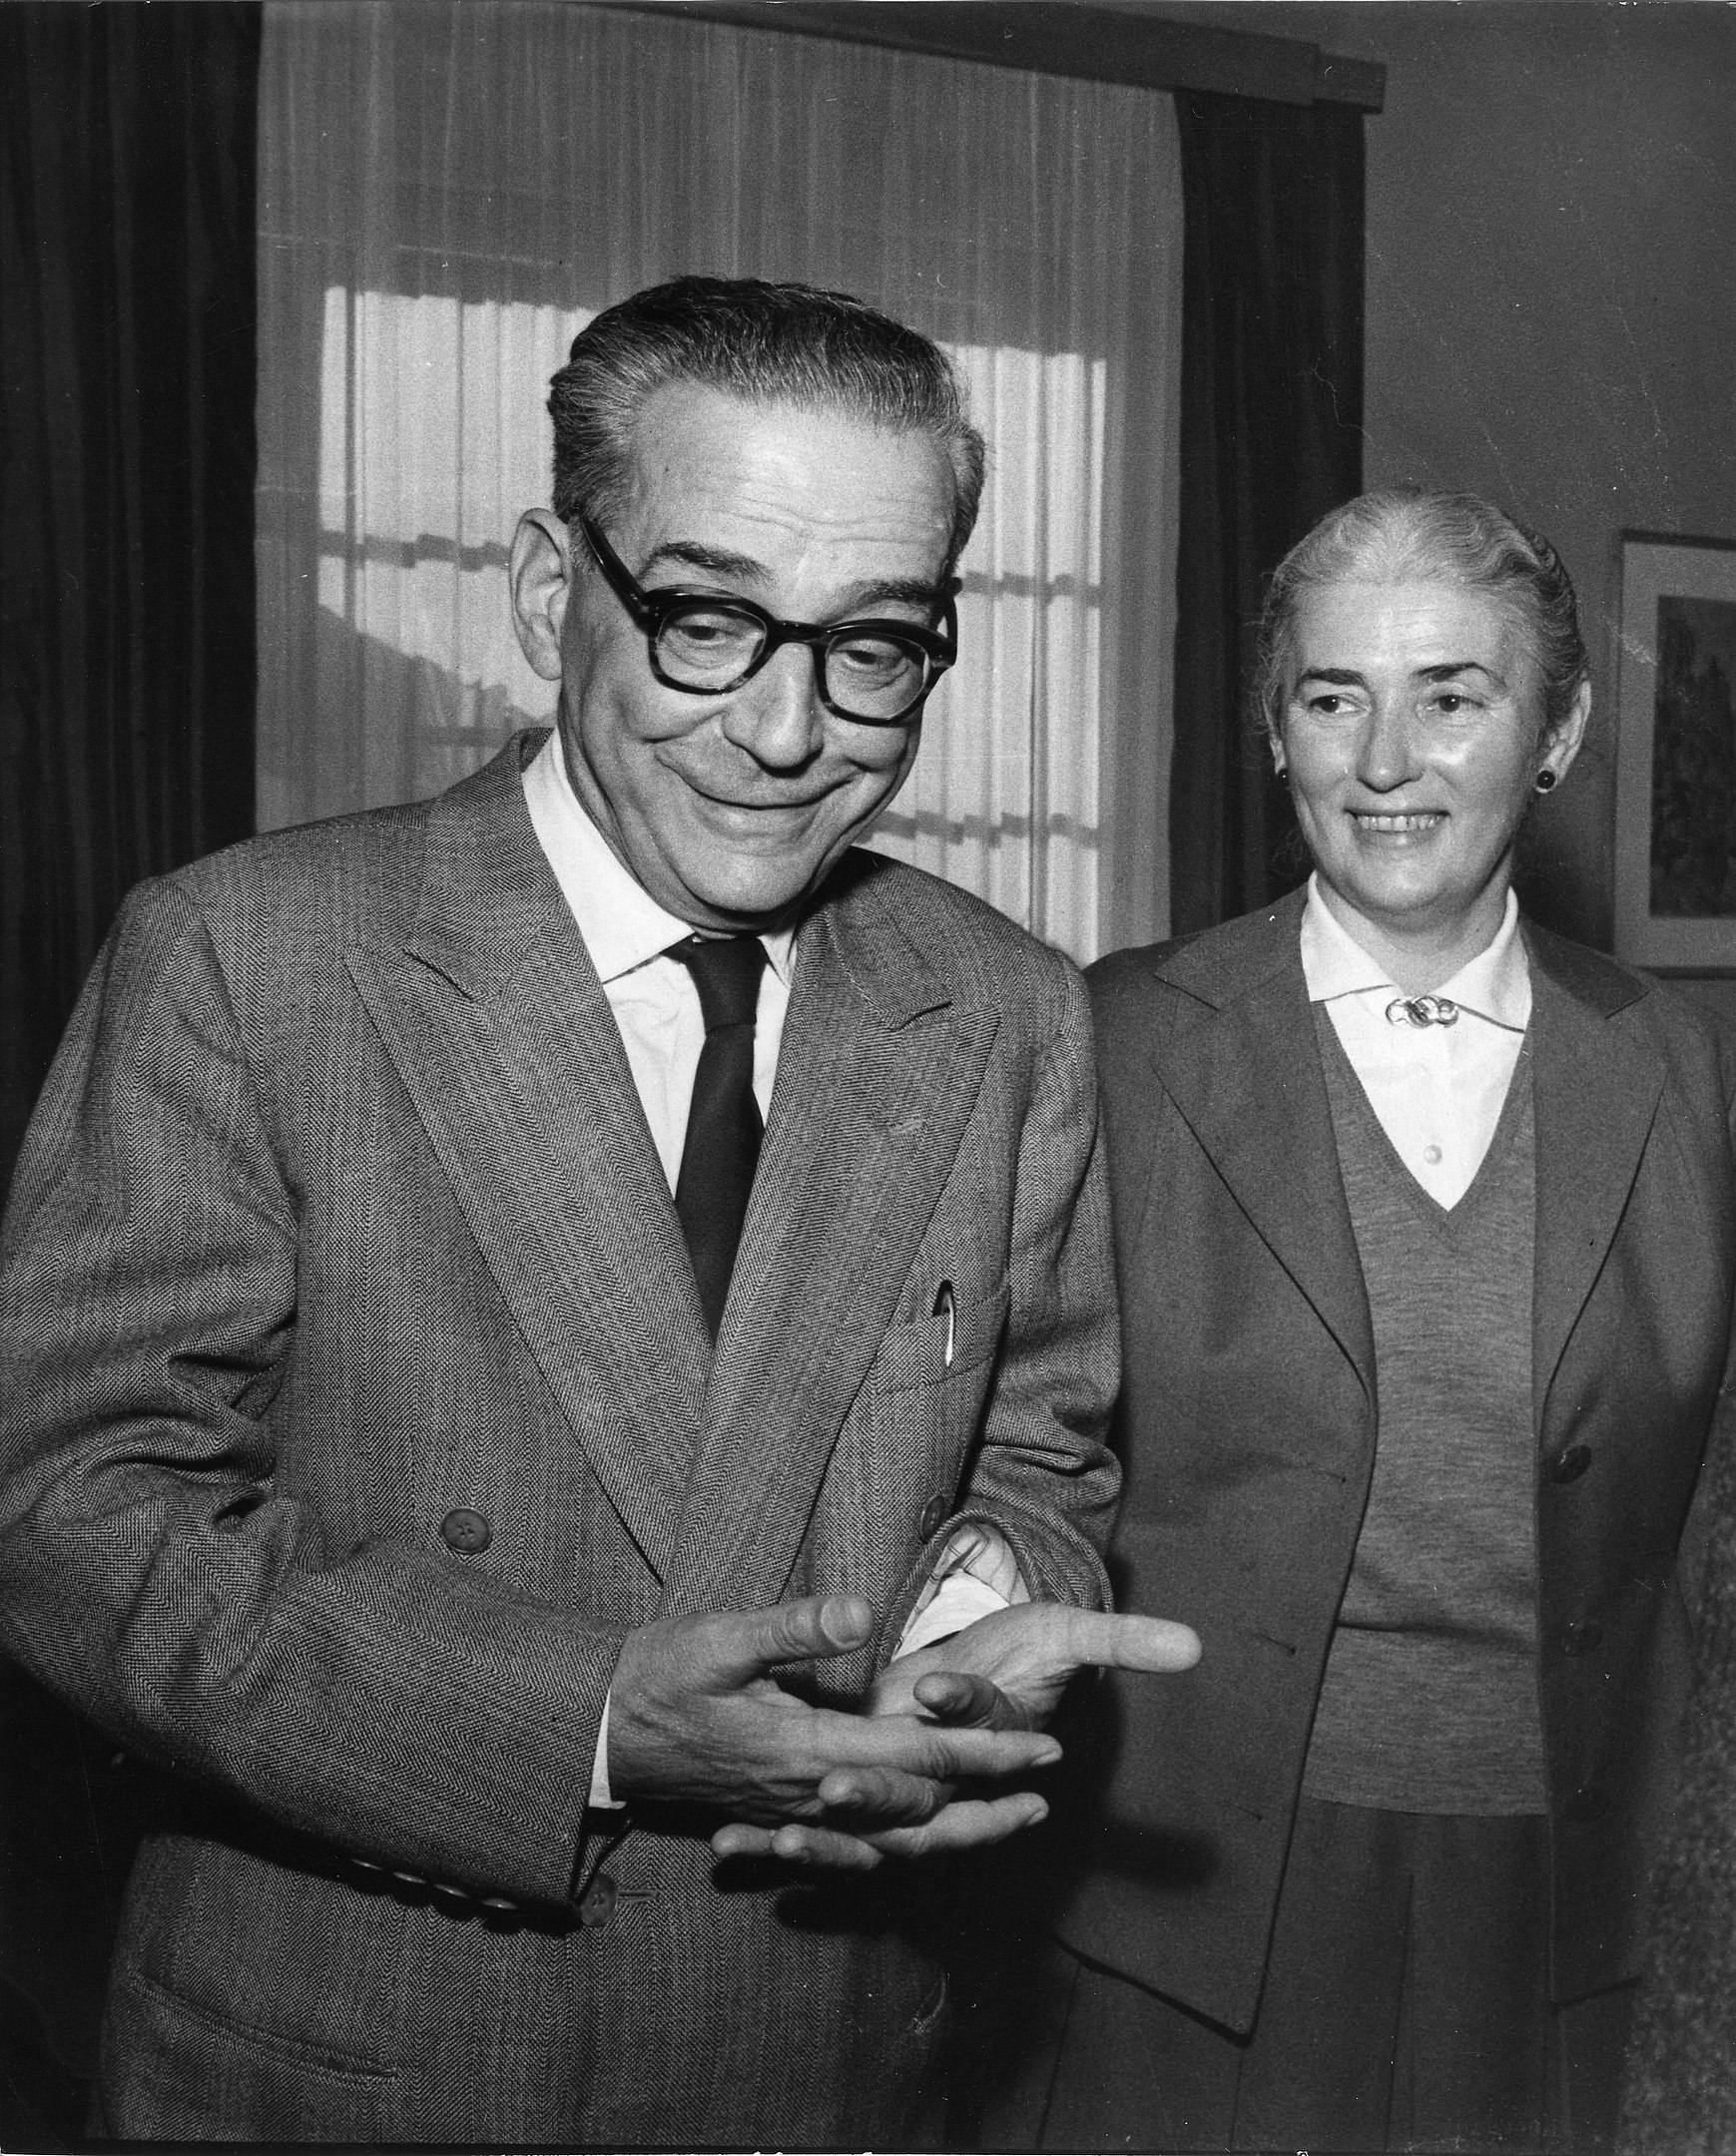  Andrić with his wife Milica upon learning he had won the Nobel Prize in Literature